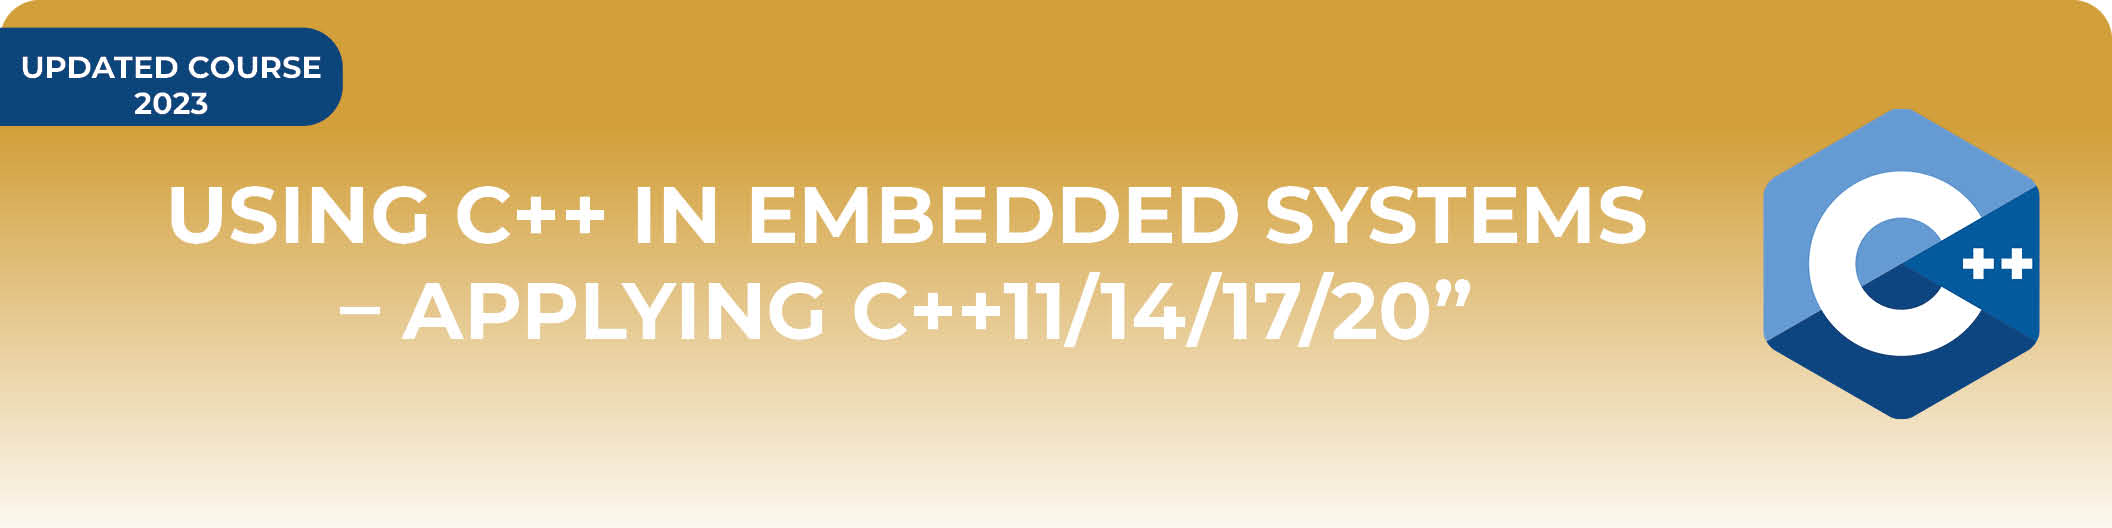 Using C++ in Embedded Systems – Applying C++11/14/17/20”